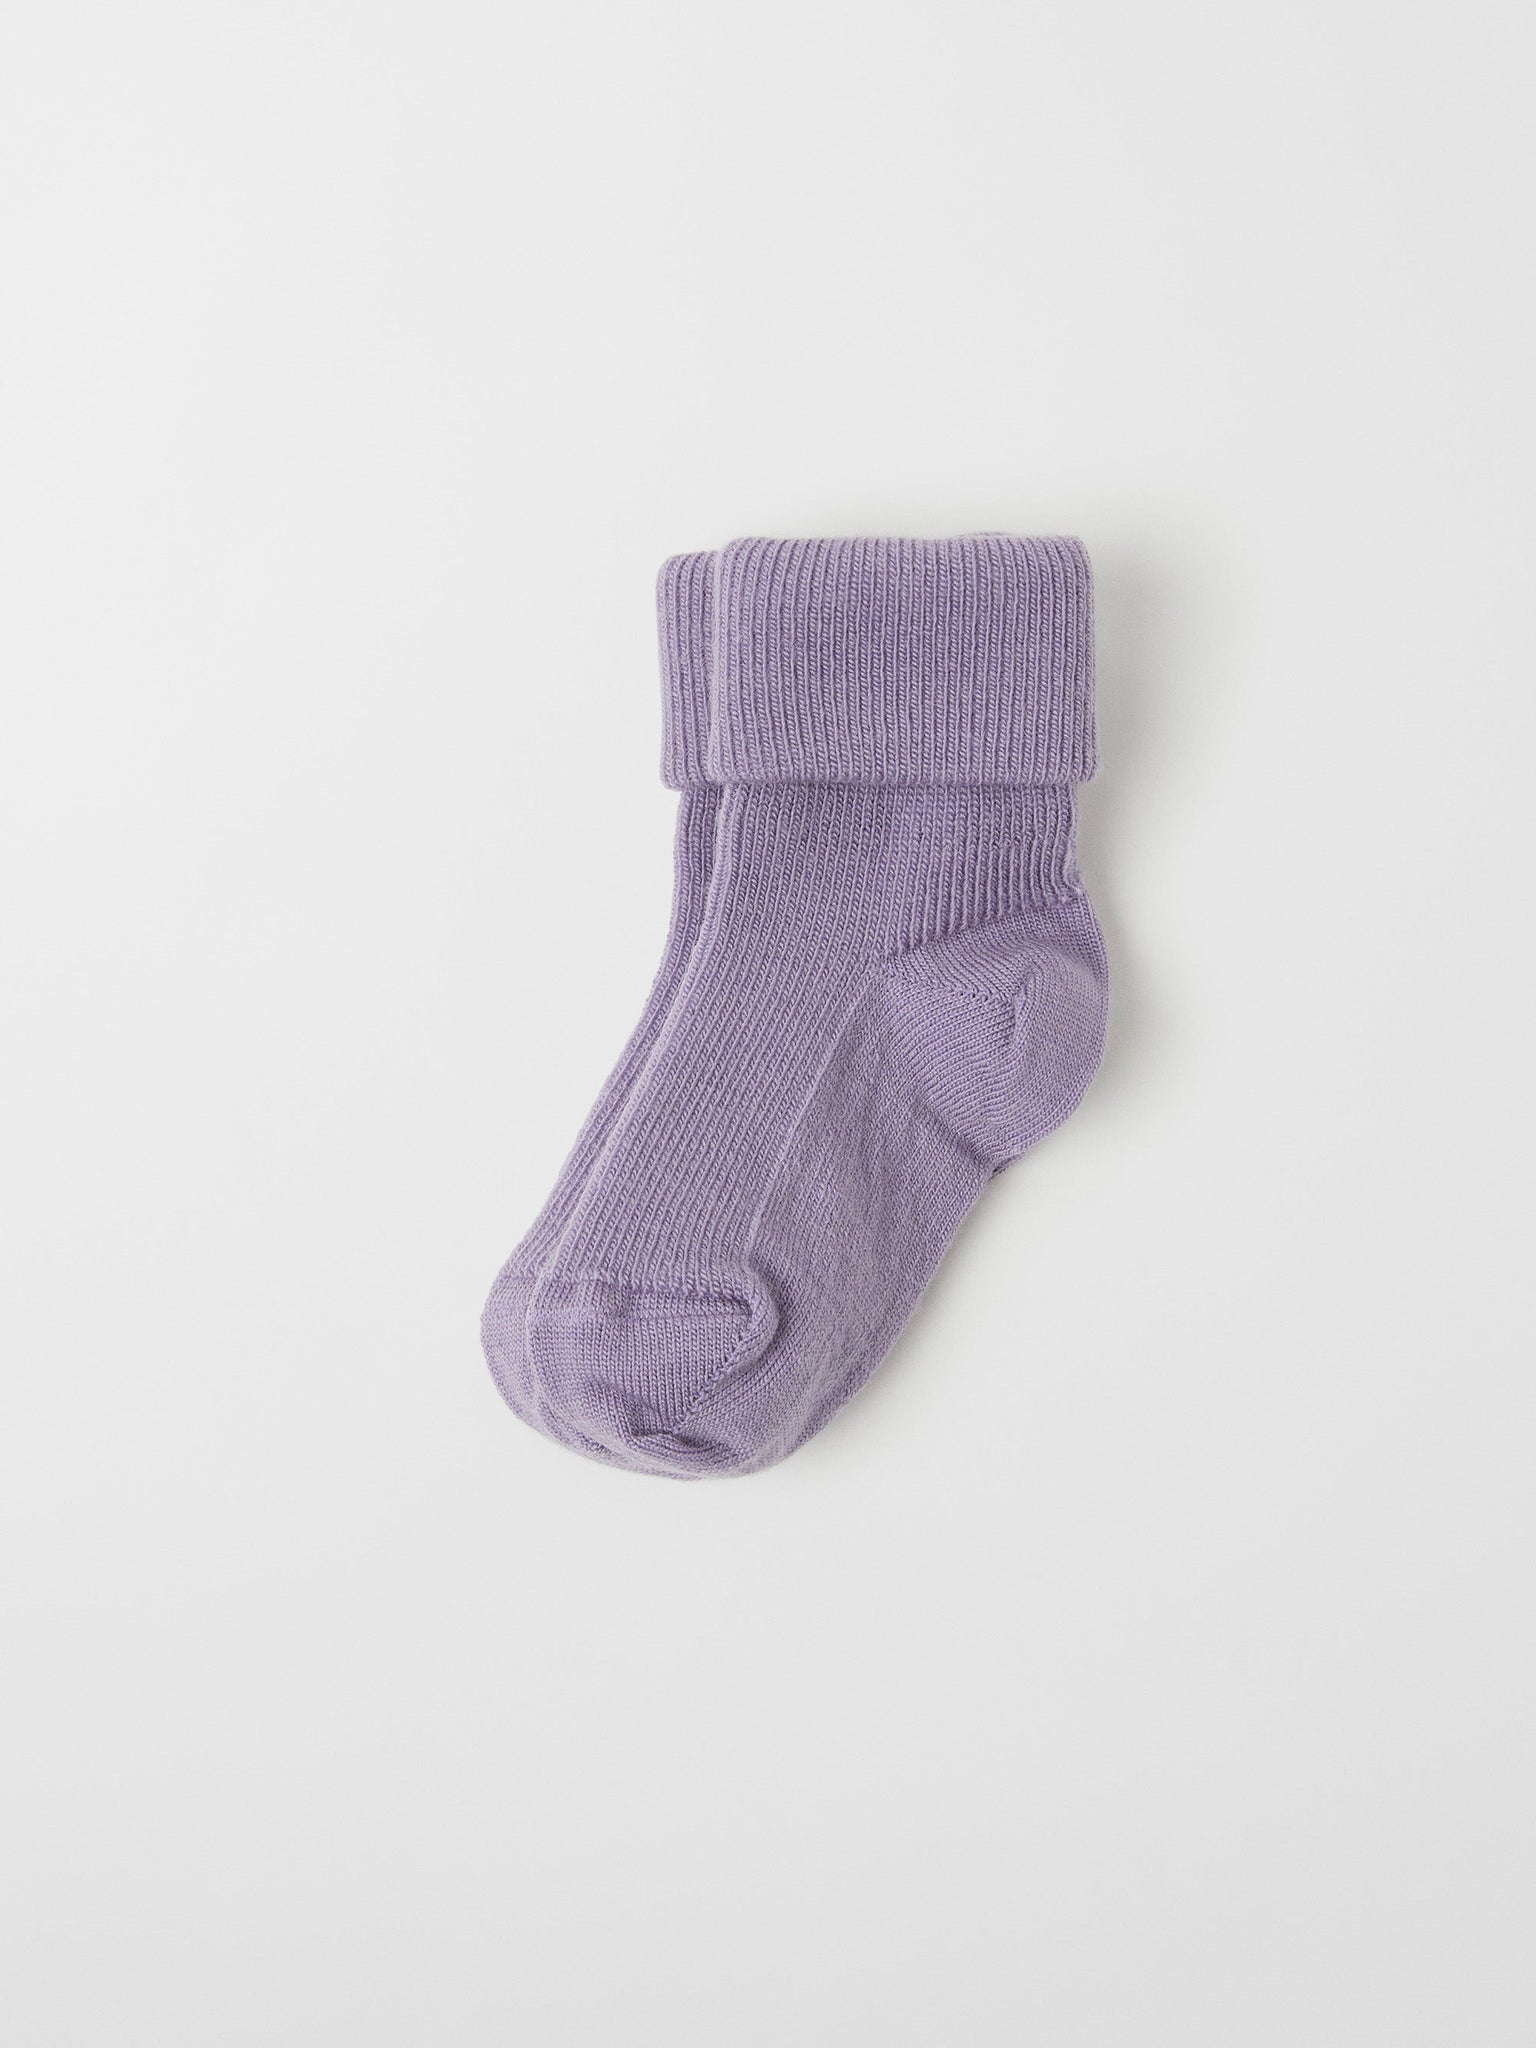 Purple Merino Wool Baby Socks from the Polarn O. Pyret baby collection. Ethically produced baby clothing.